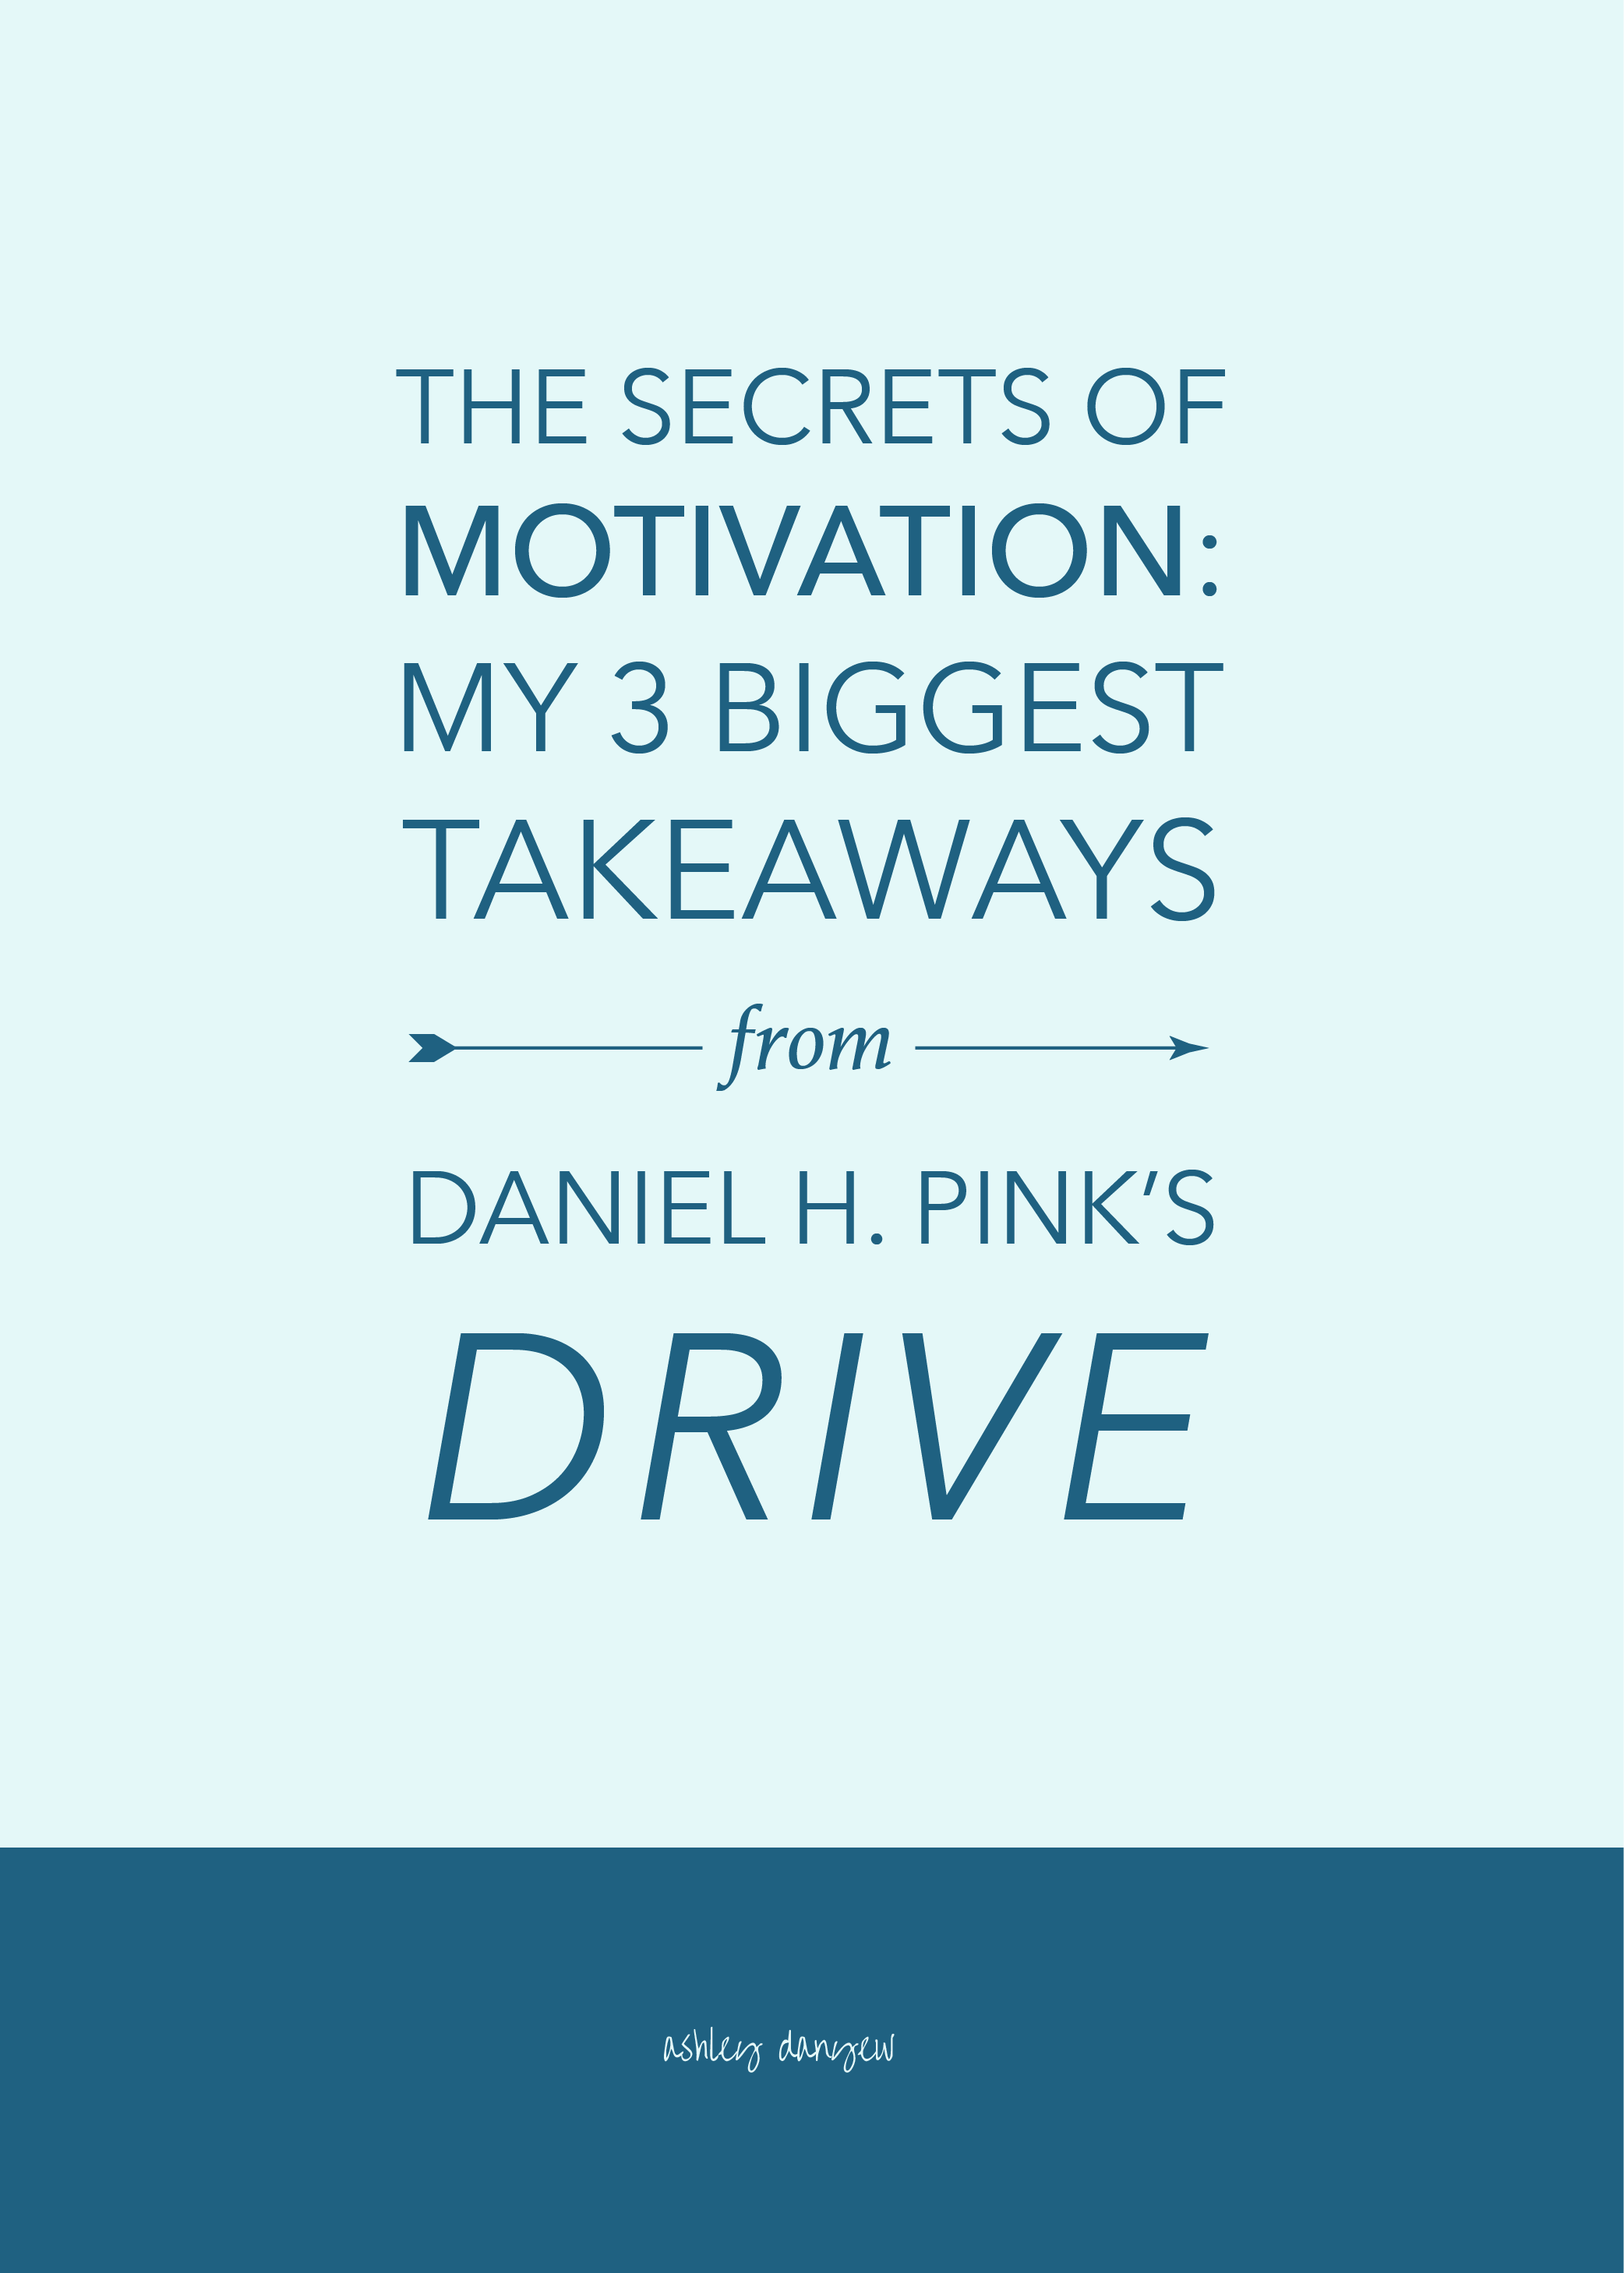 Copy of The Secrets of Motivation: My 3 Biggest Takeaways from Daniel H. Pink's Drive